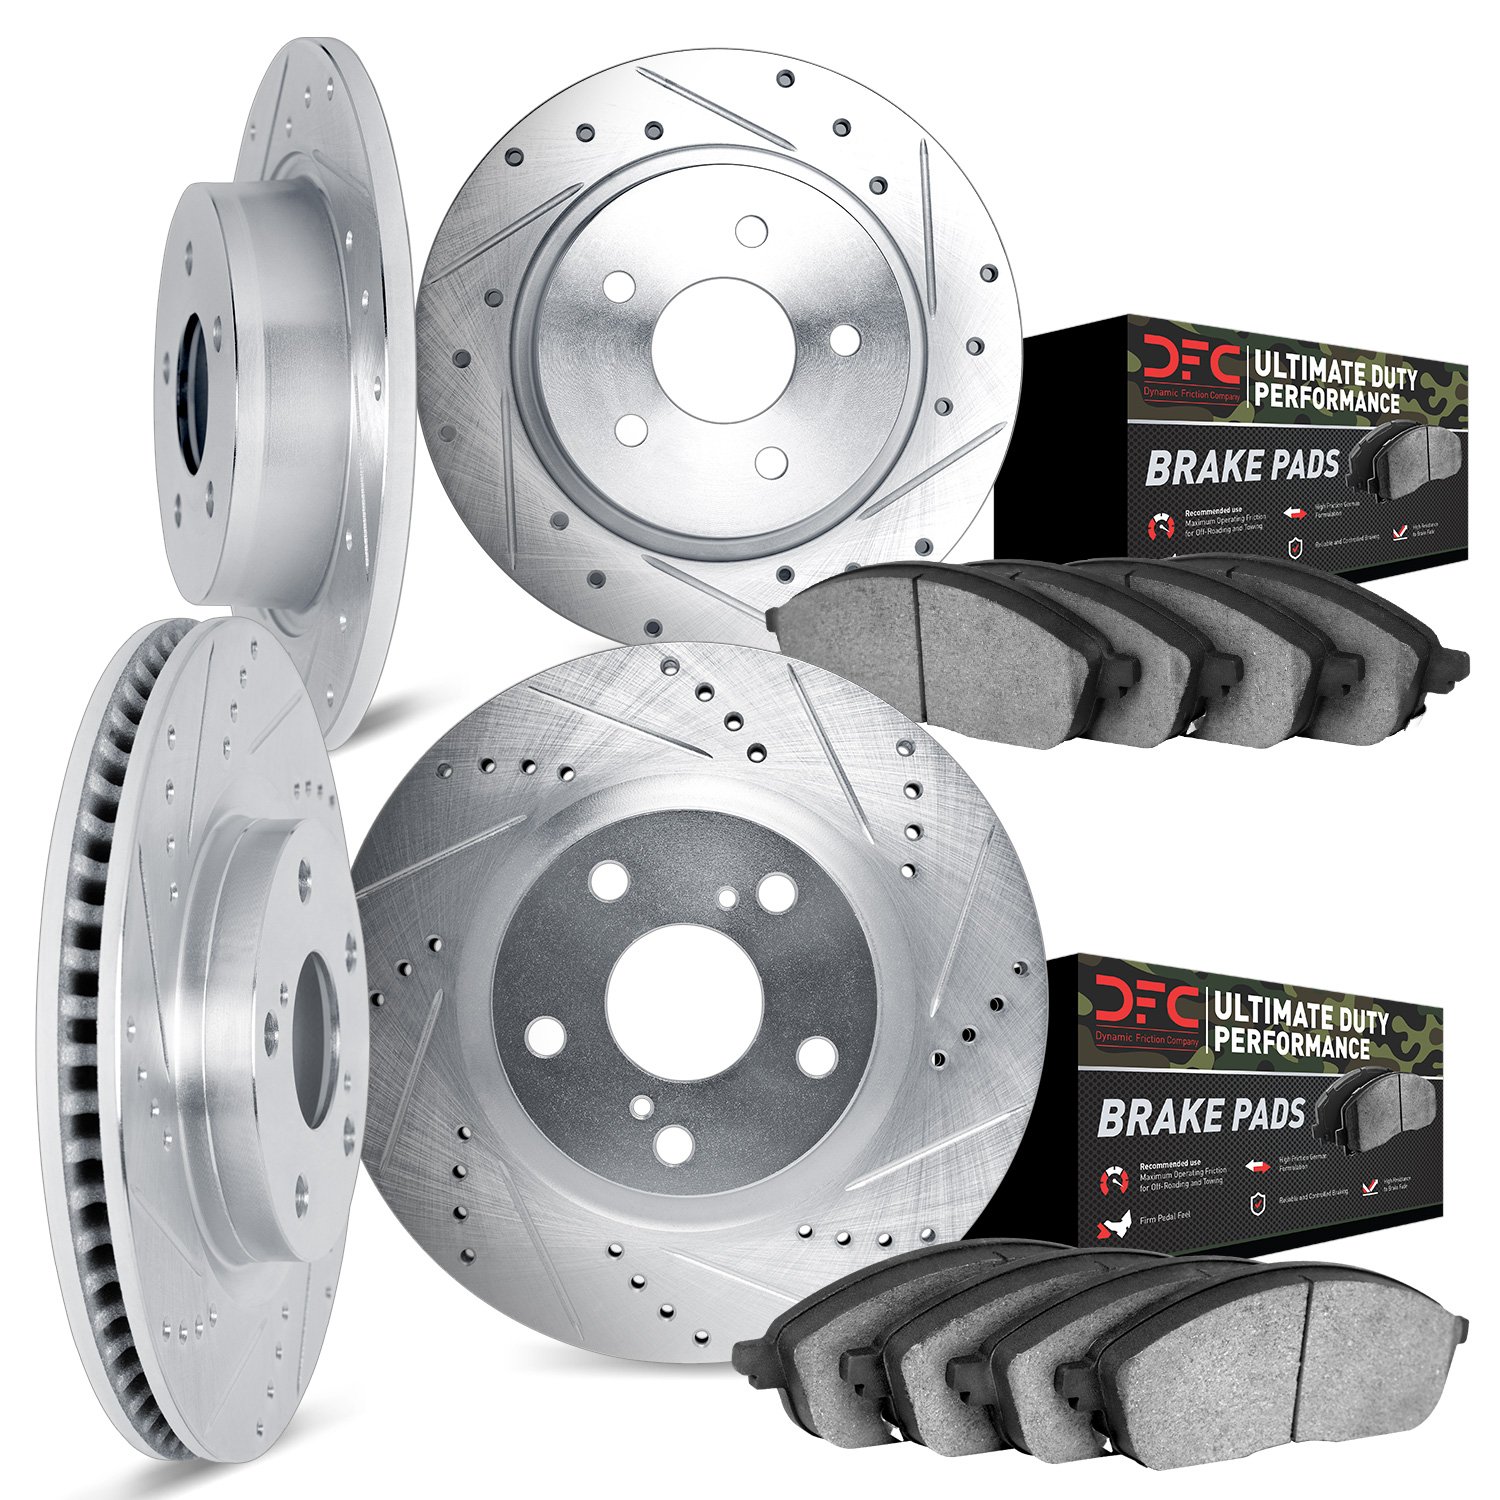 7404-54027 Drilled/Slotted Brake Rotors with Ultimate-Duty Brake Pads Kit [Silver], 2003-2005 Ford/Lincoln/Mercury/Mazda, Positi